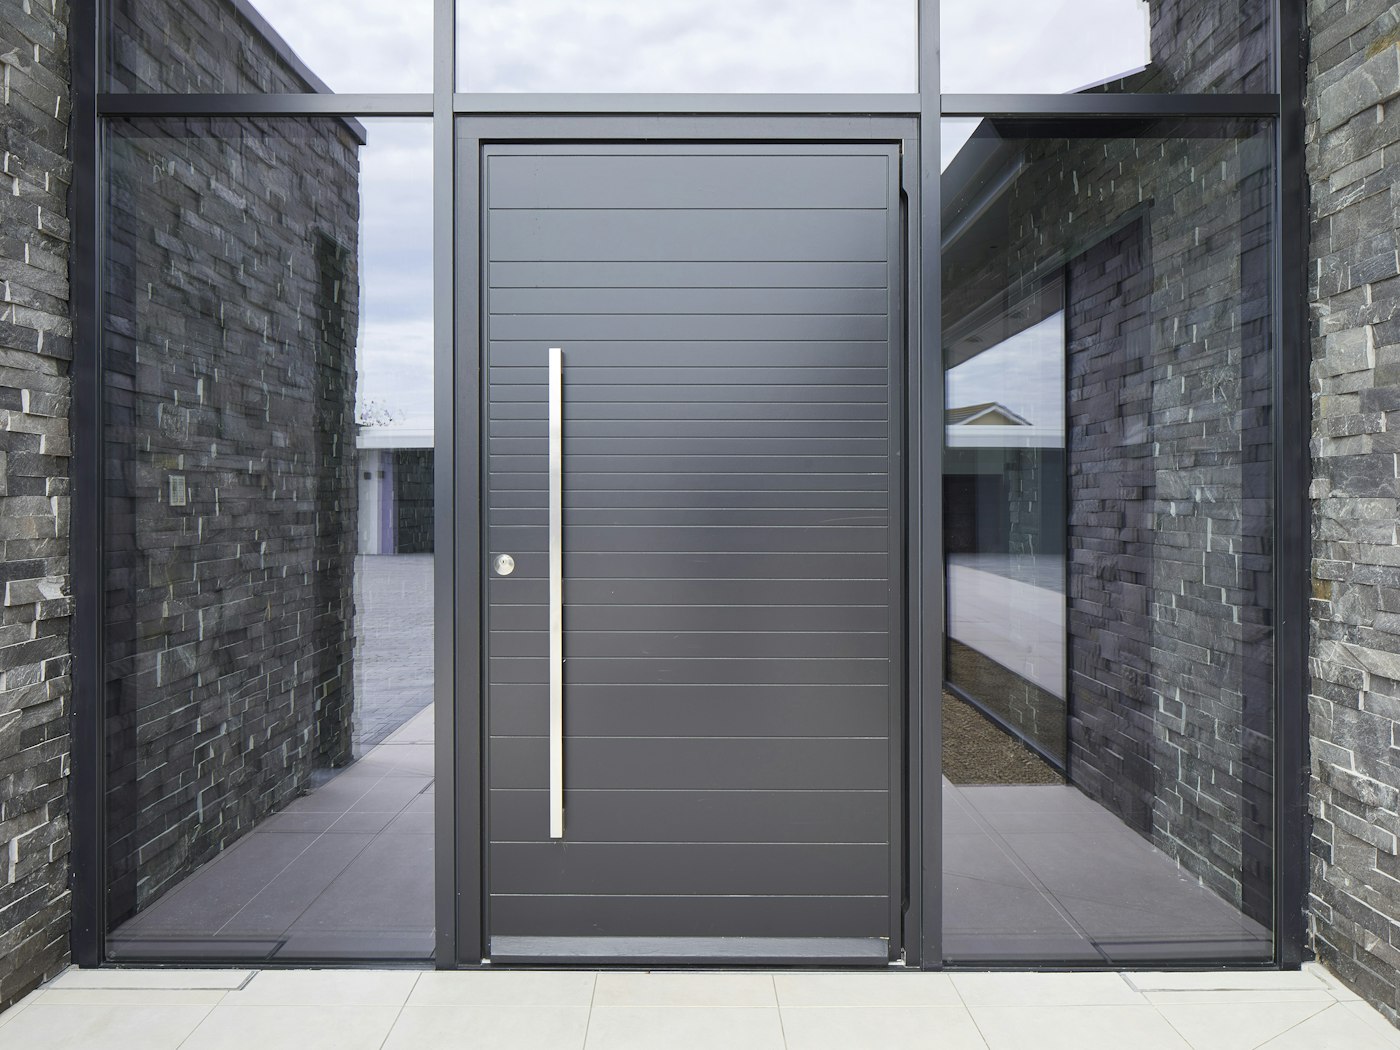 Keeping the door simple was essential to the success of this contemporary home